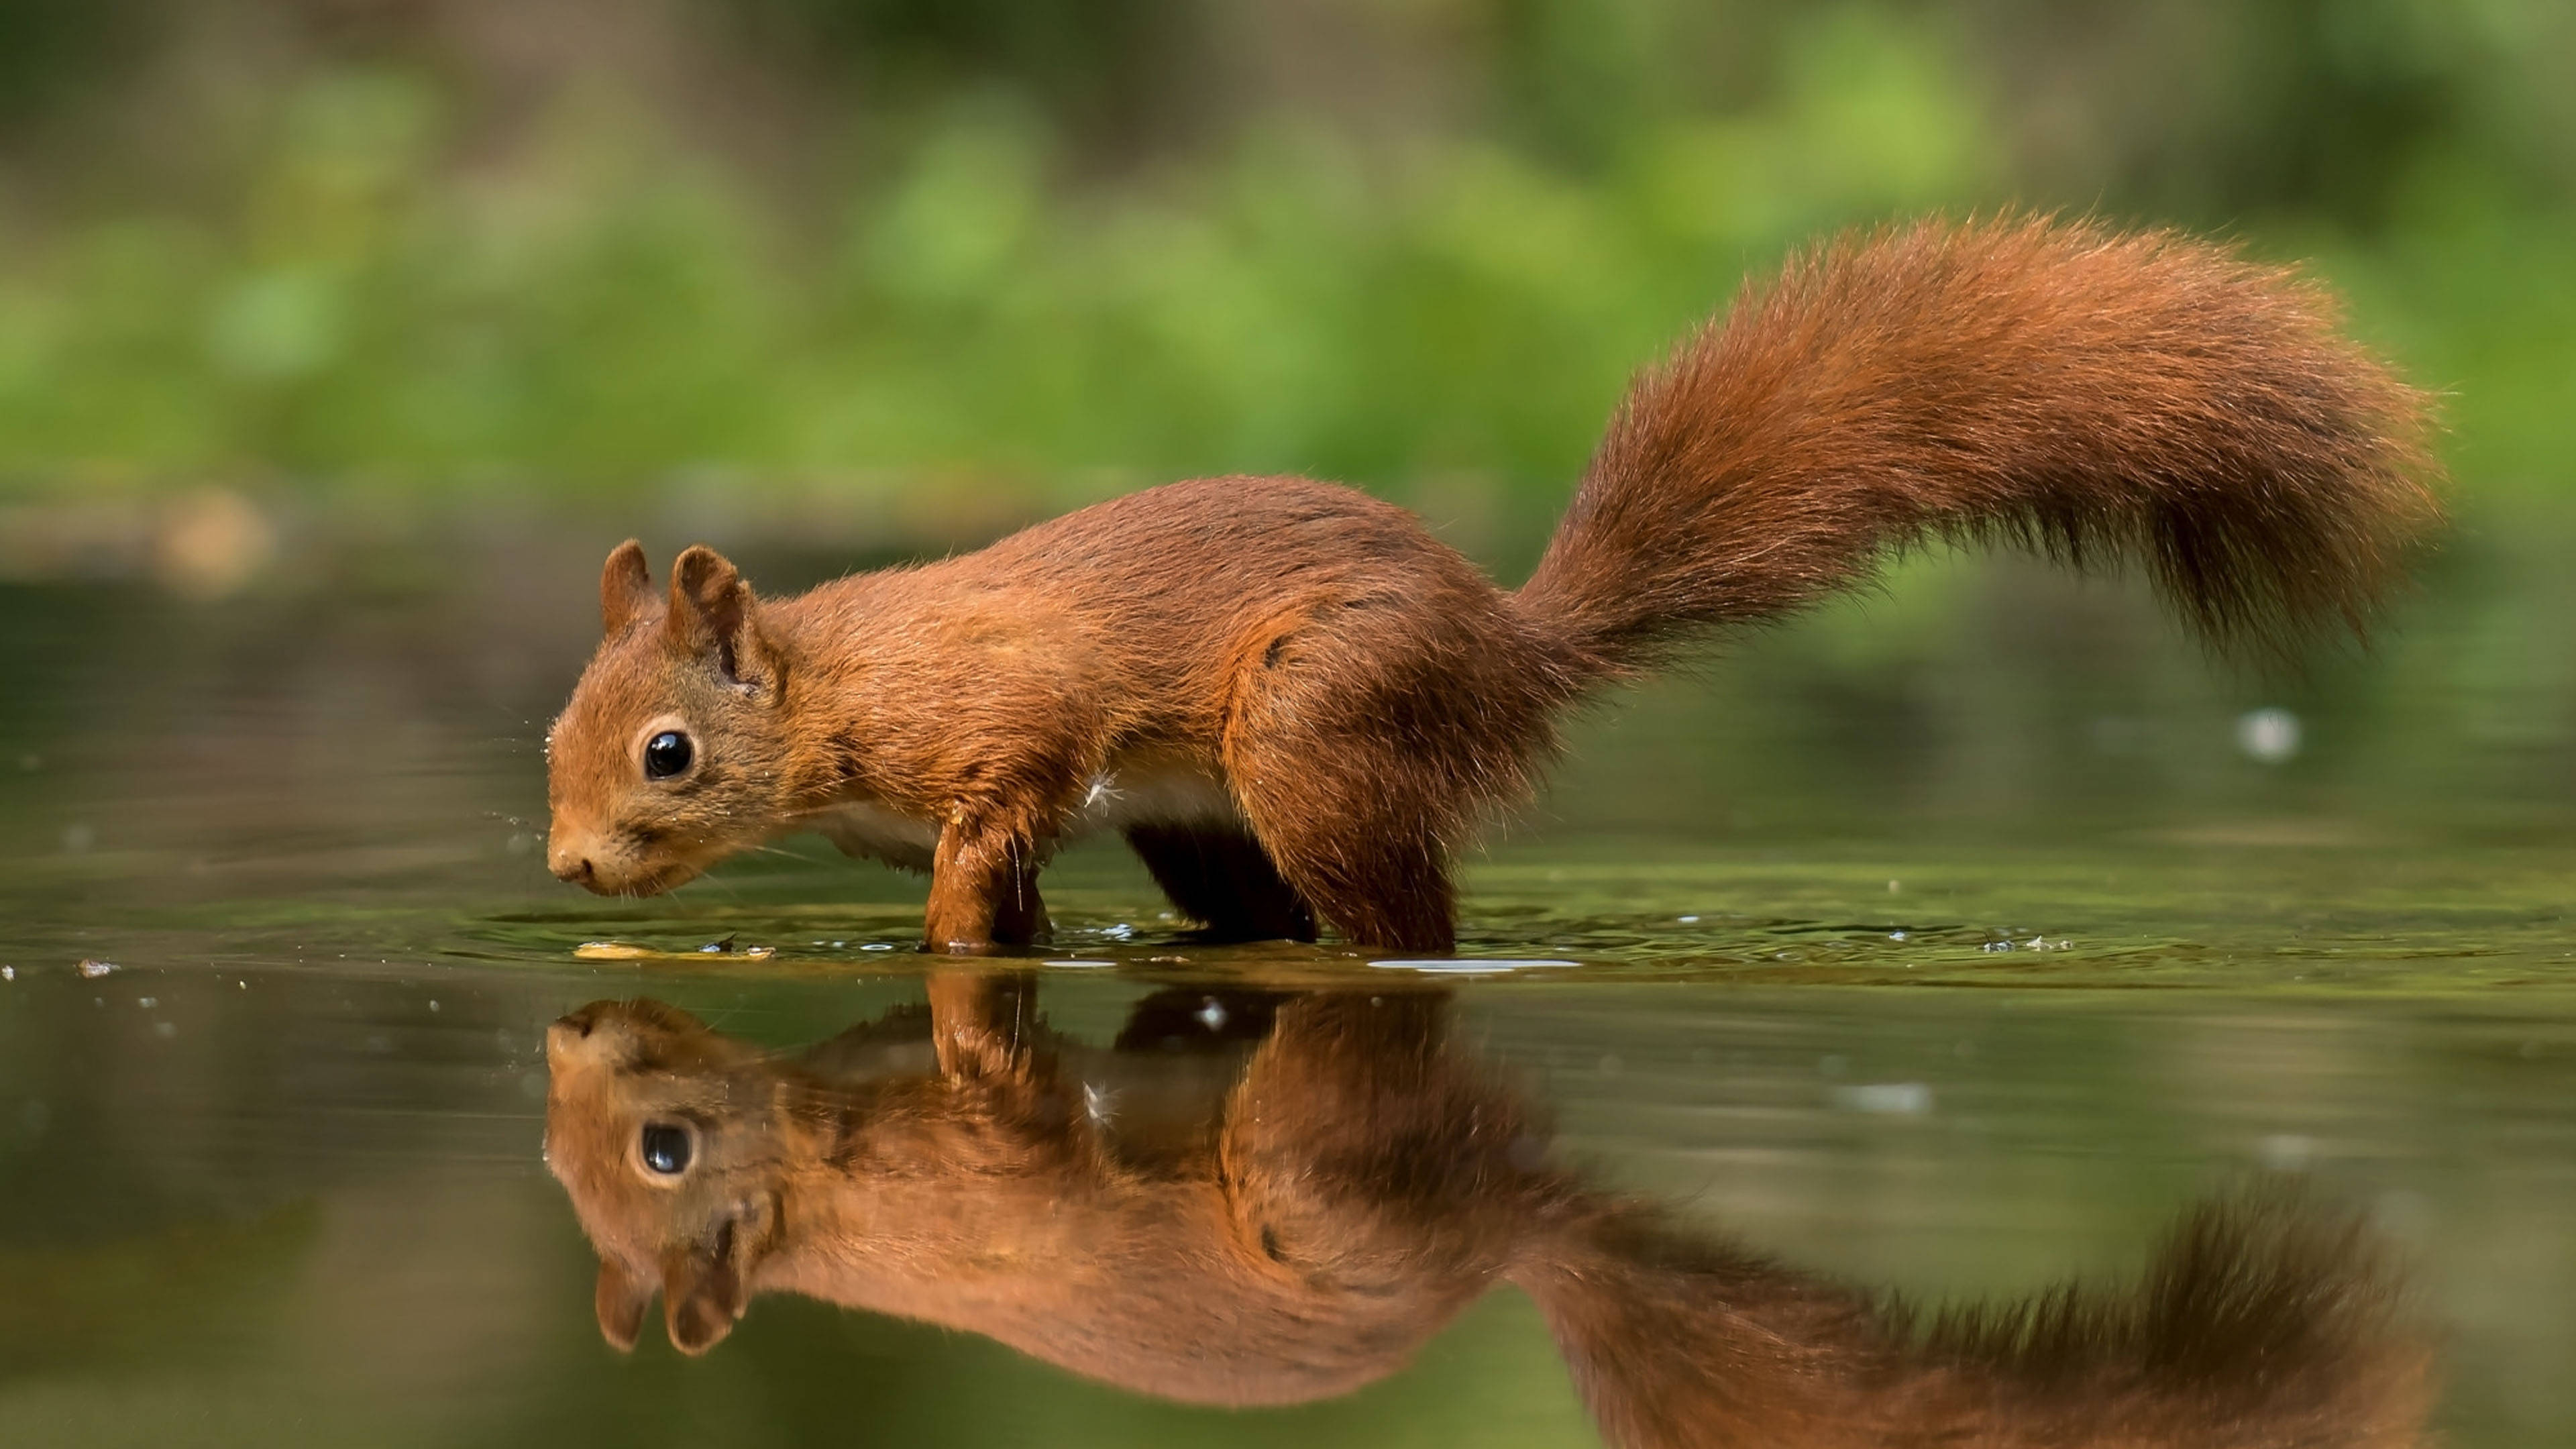 3840x2160 Download Squirrel On Water Wallpaper